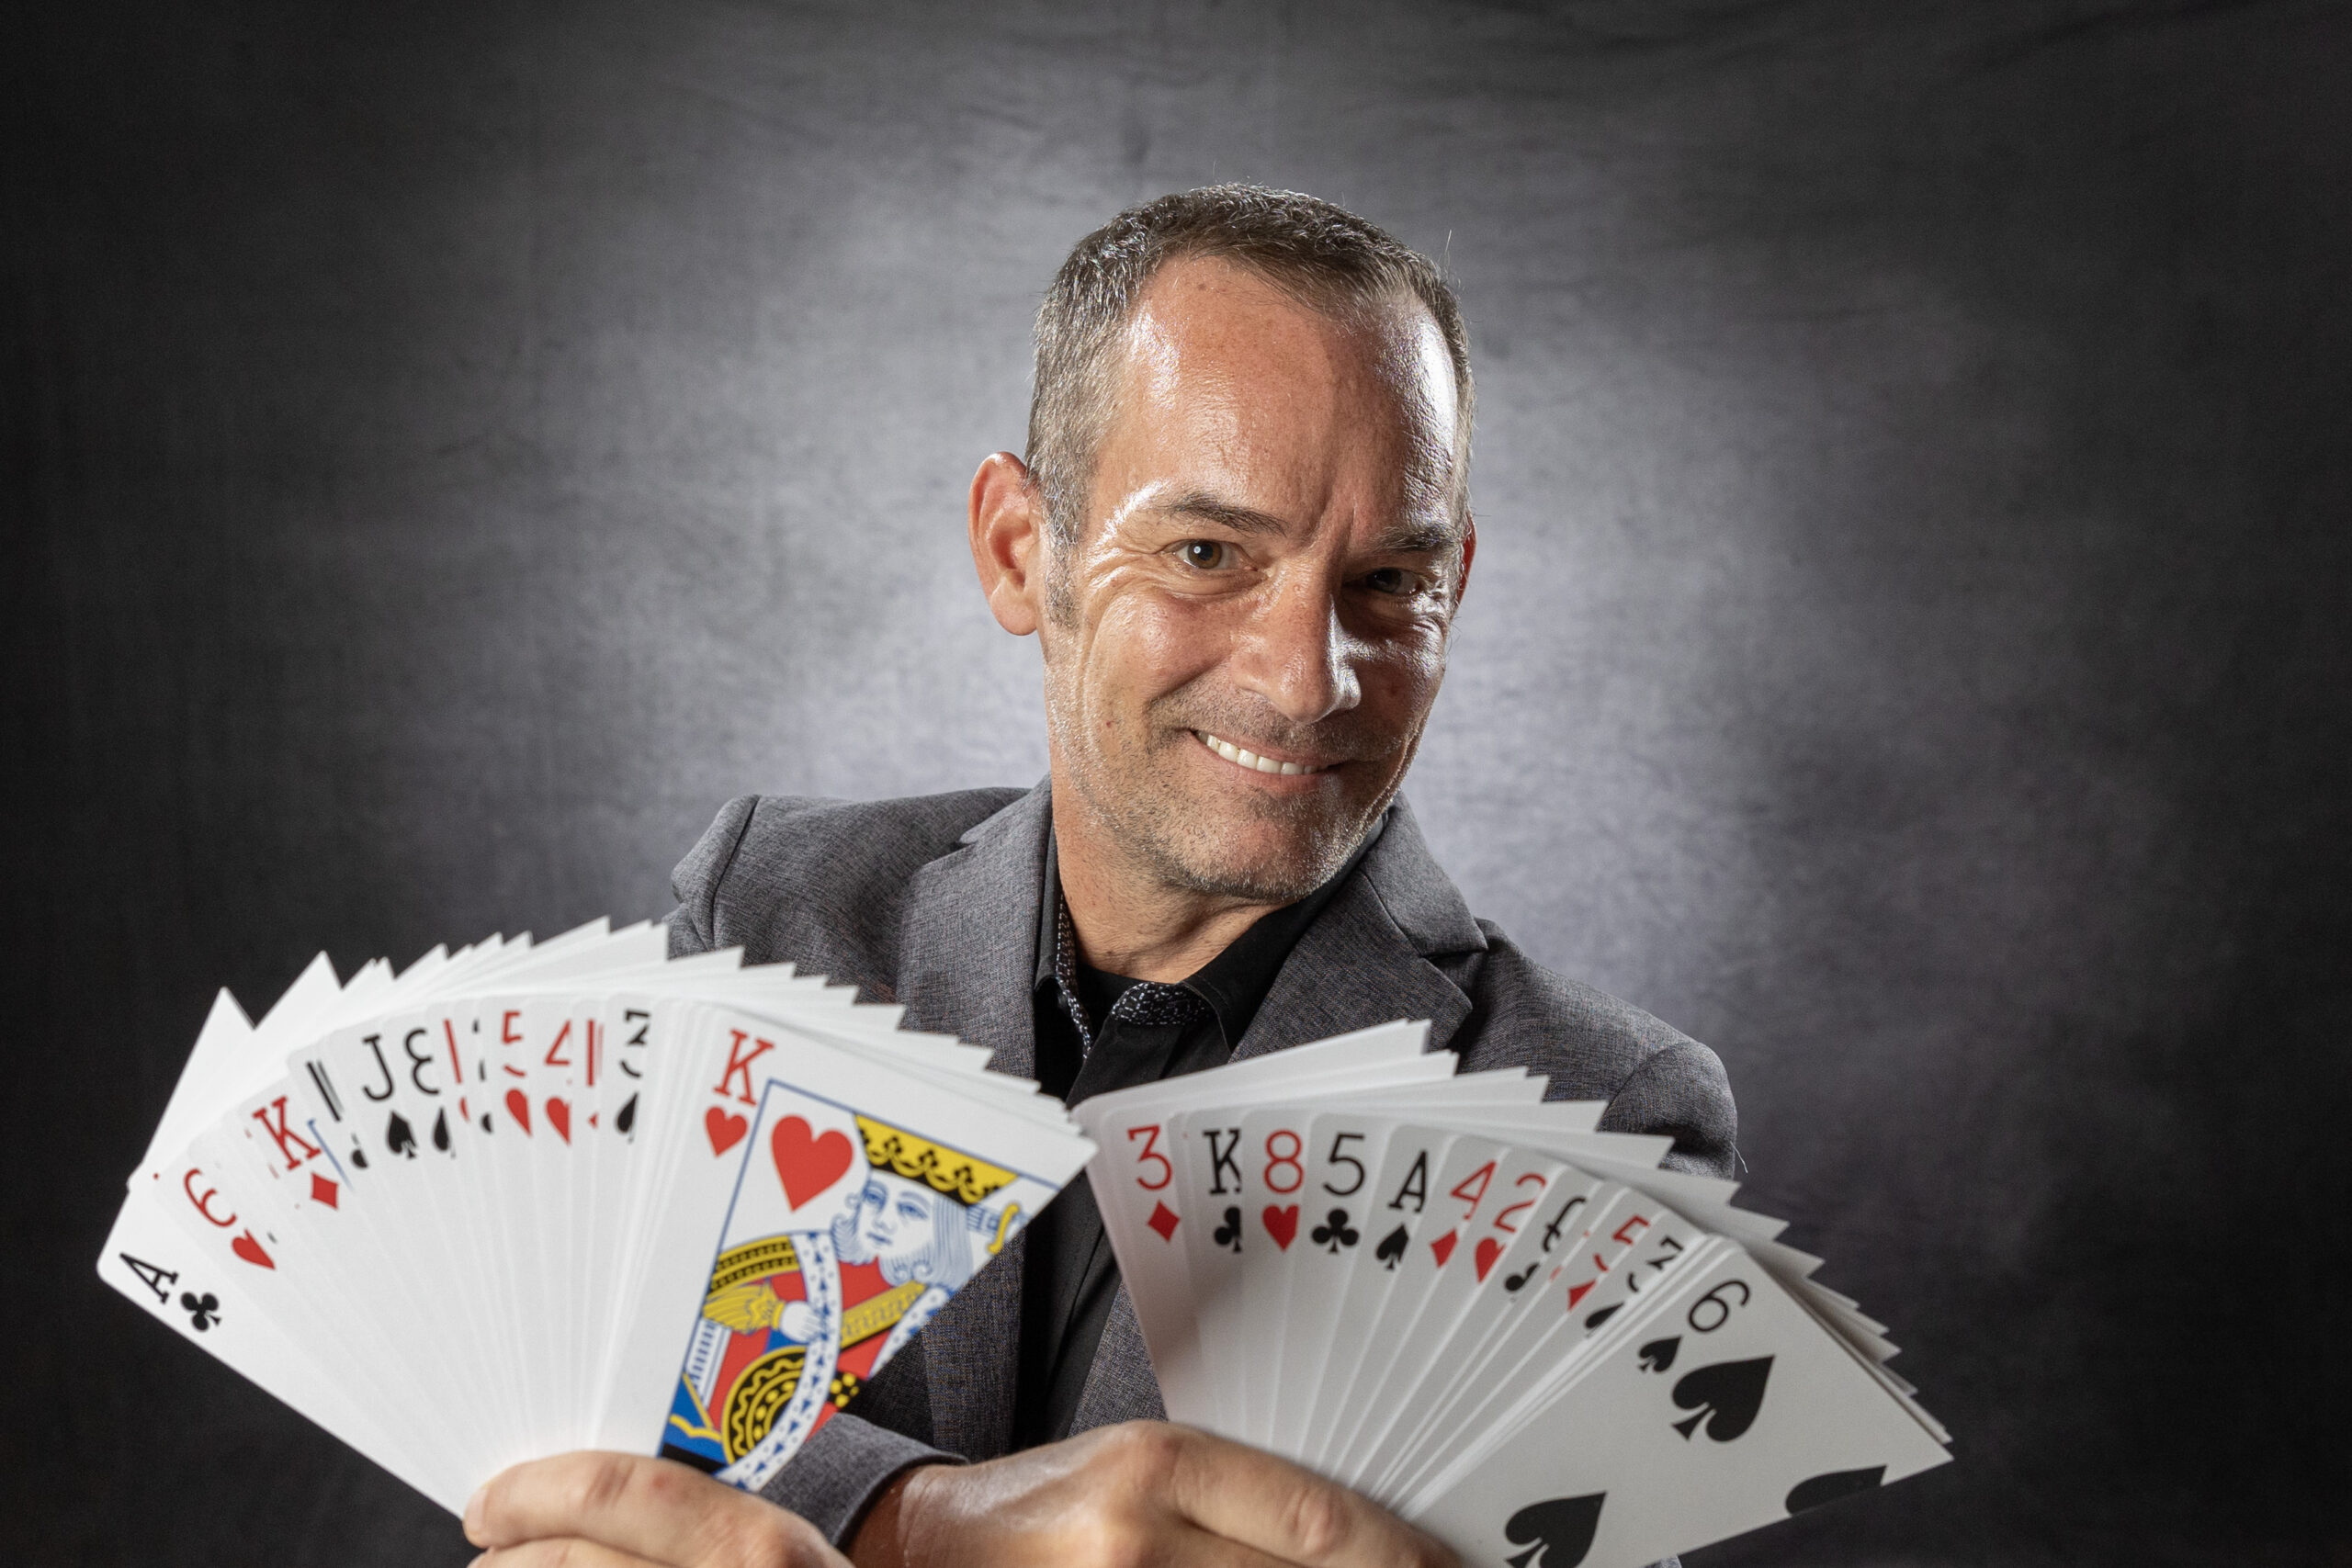 Man smiling while presenting a fan of playing cards.